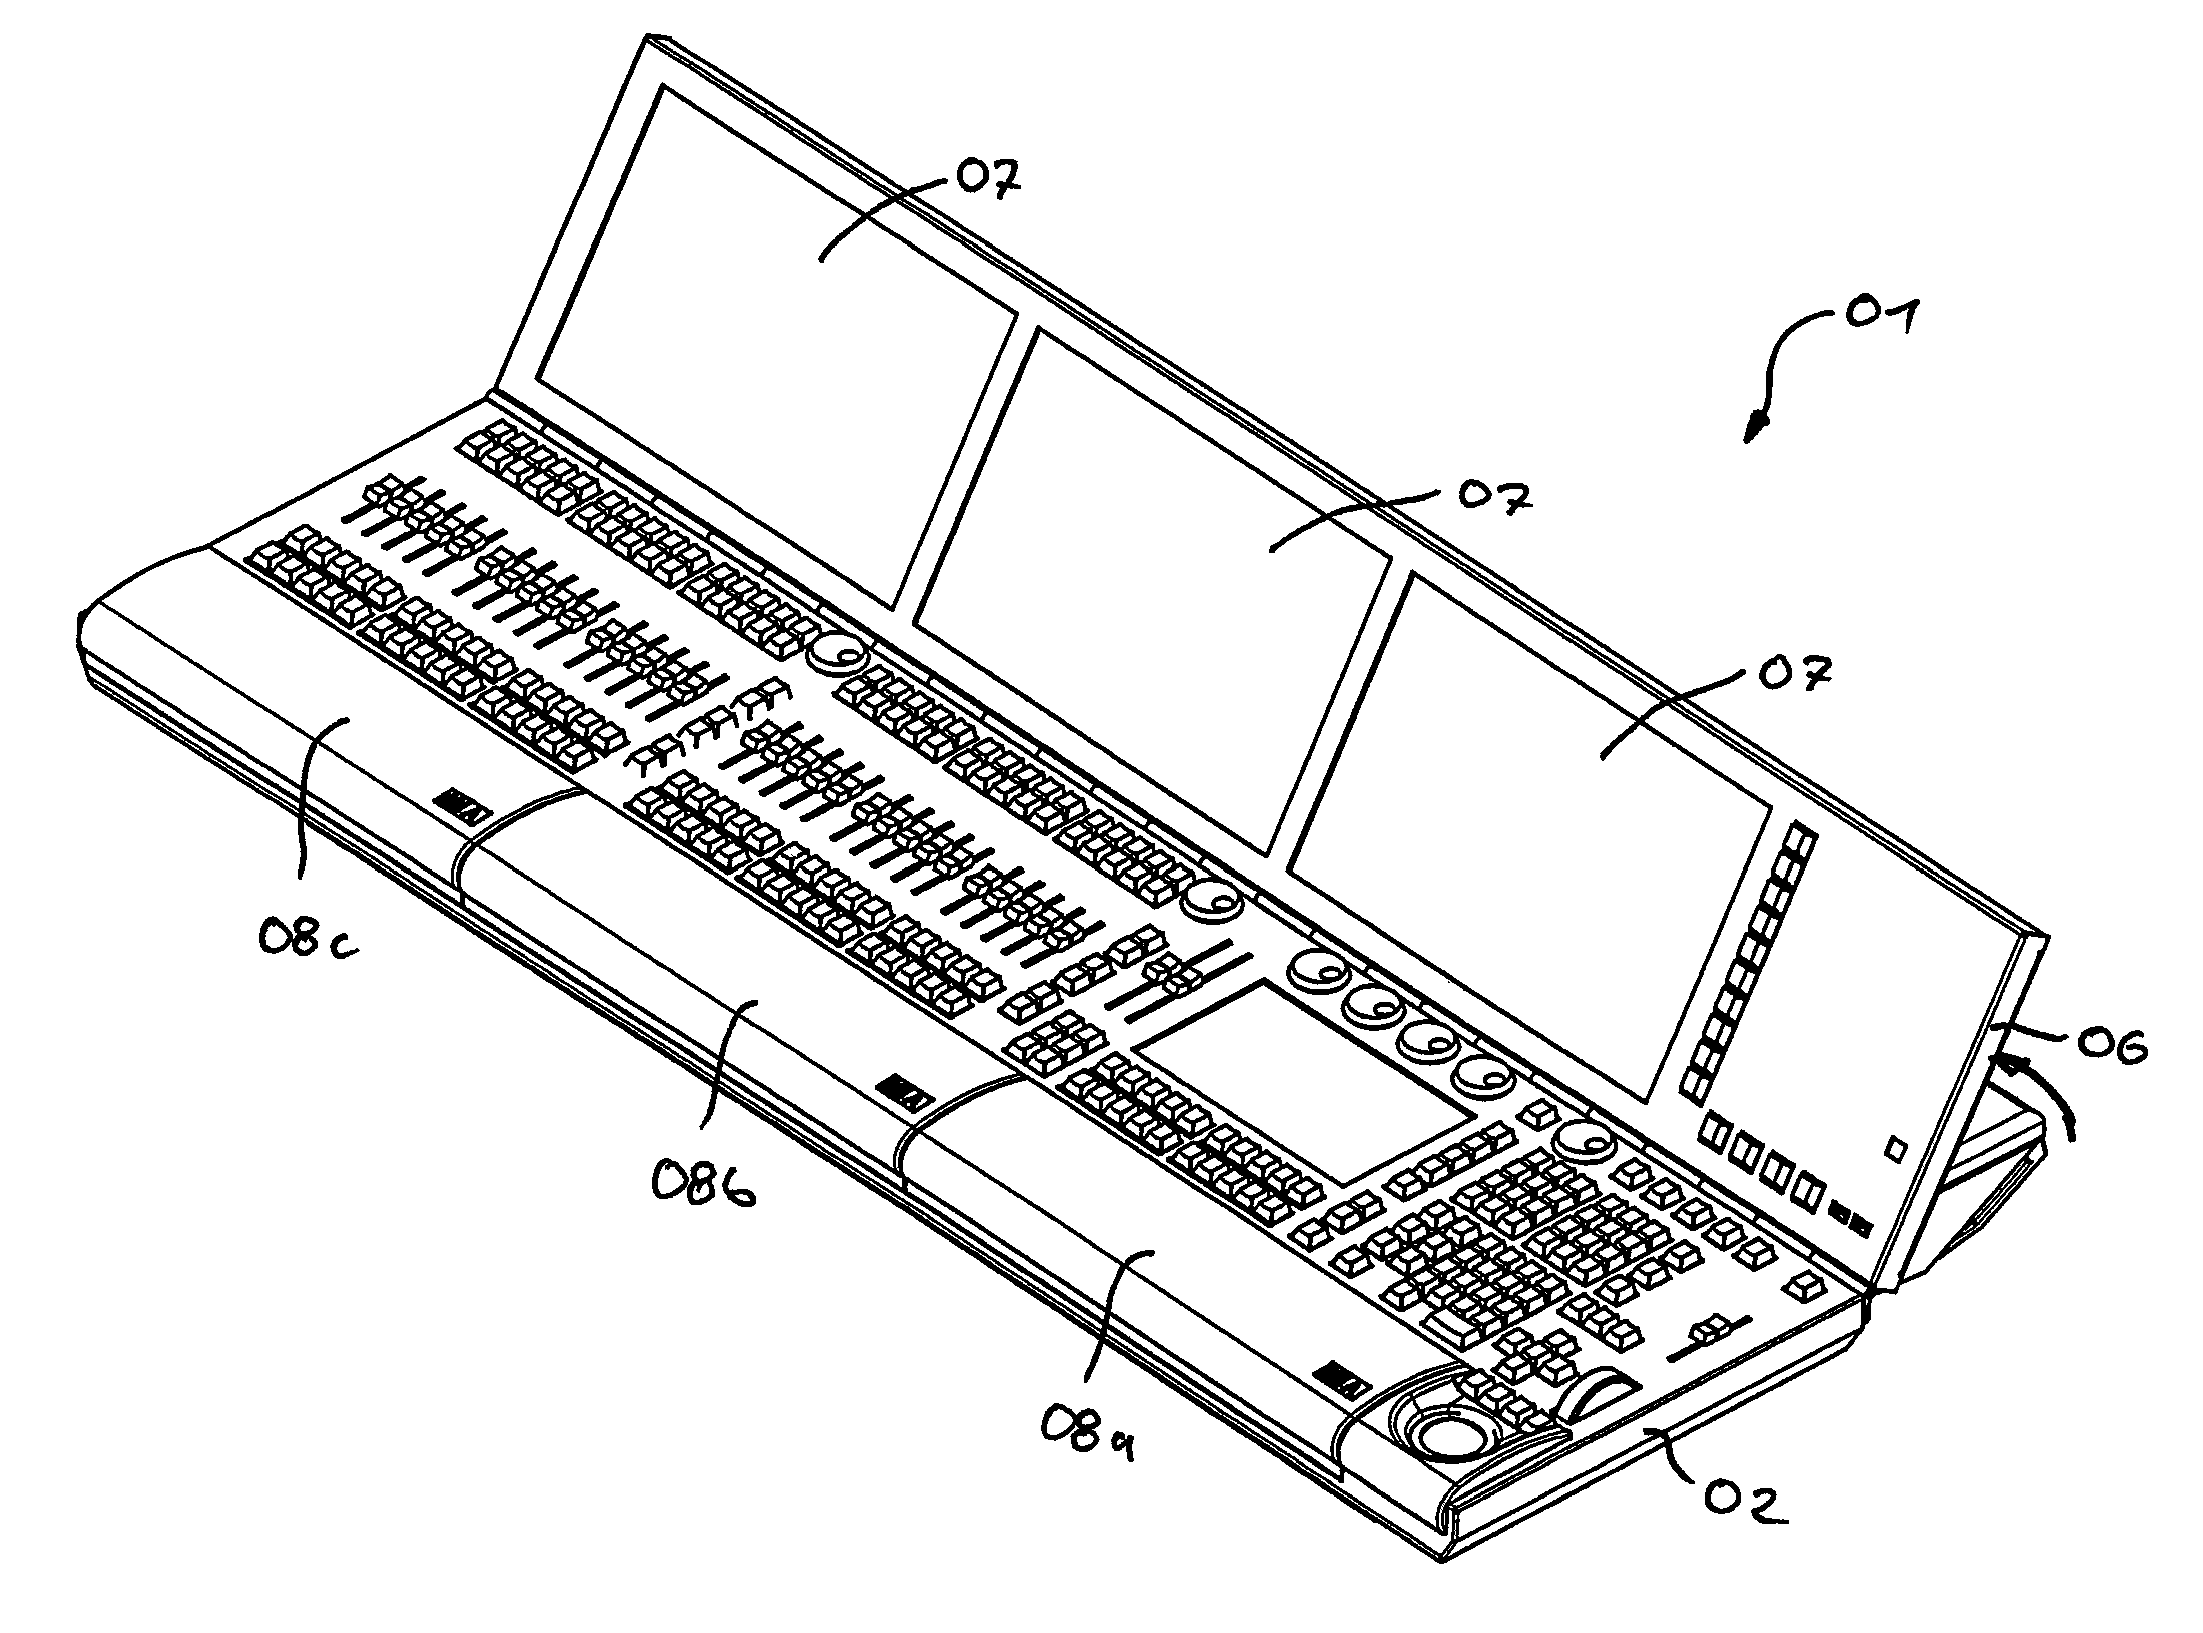 Lighting control console for controlling a lighting system